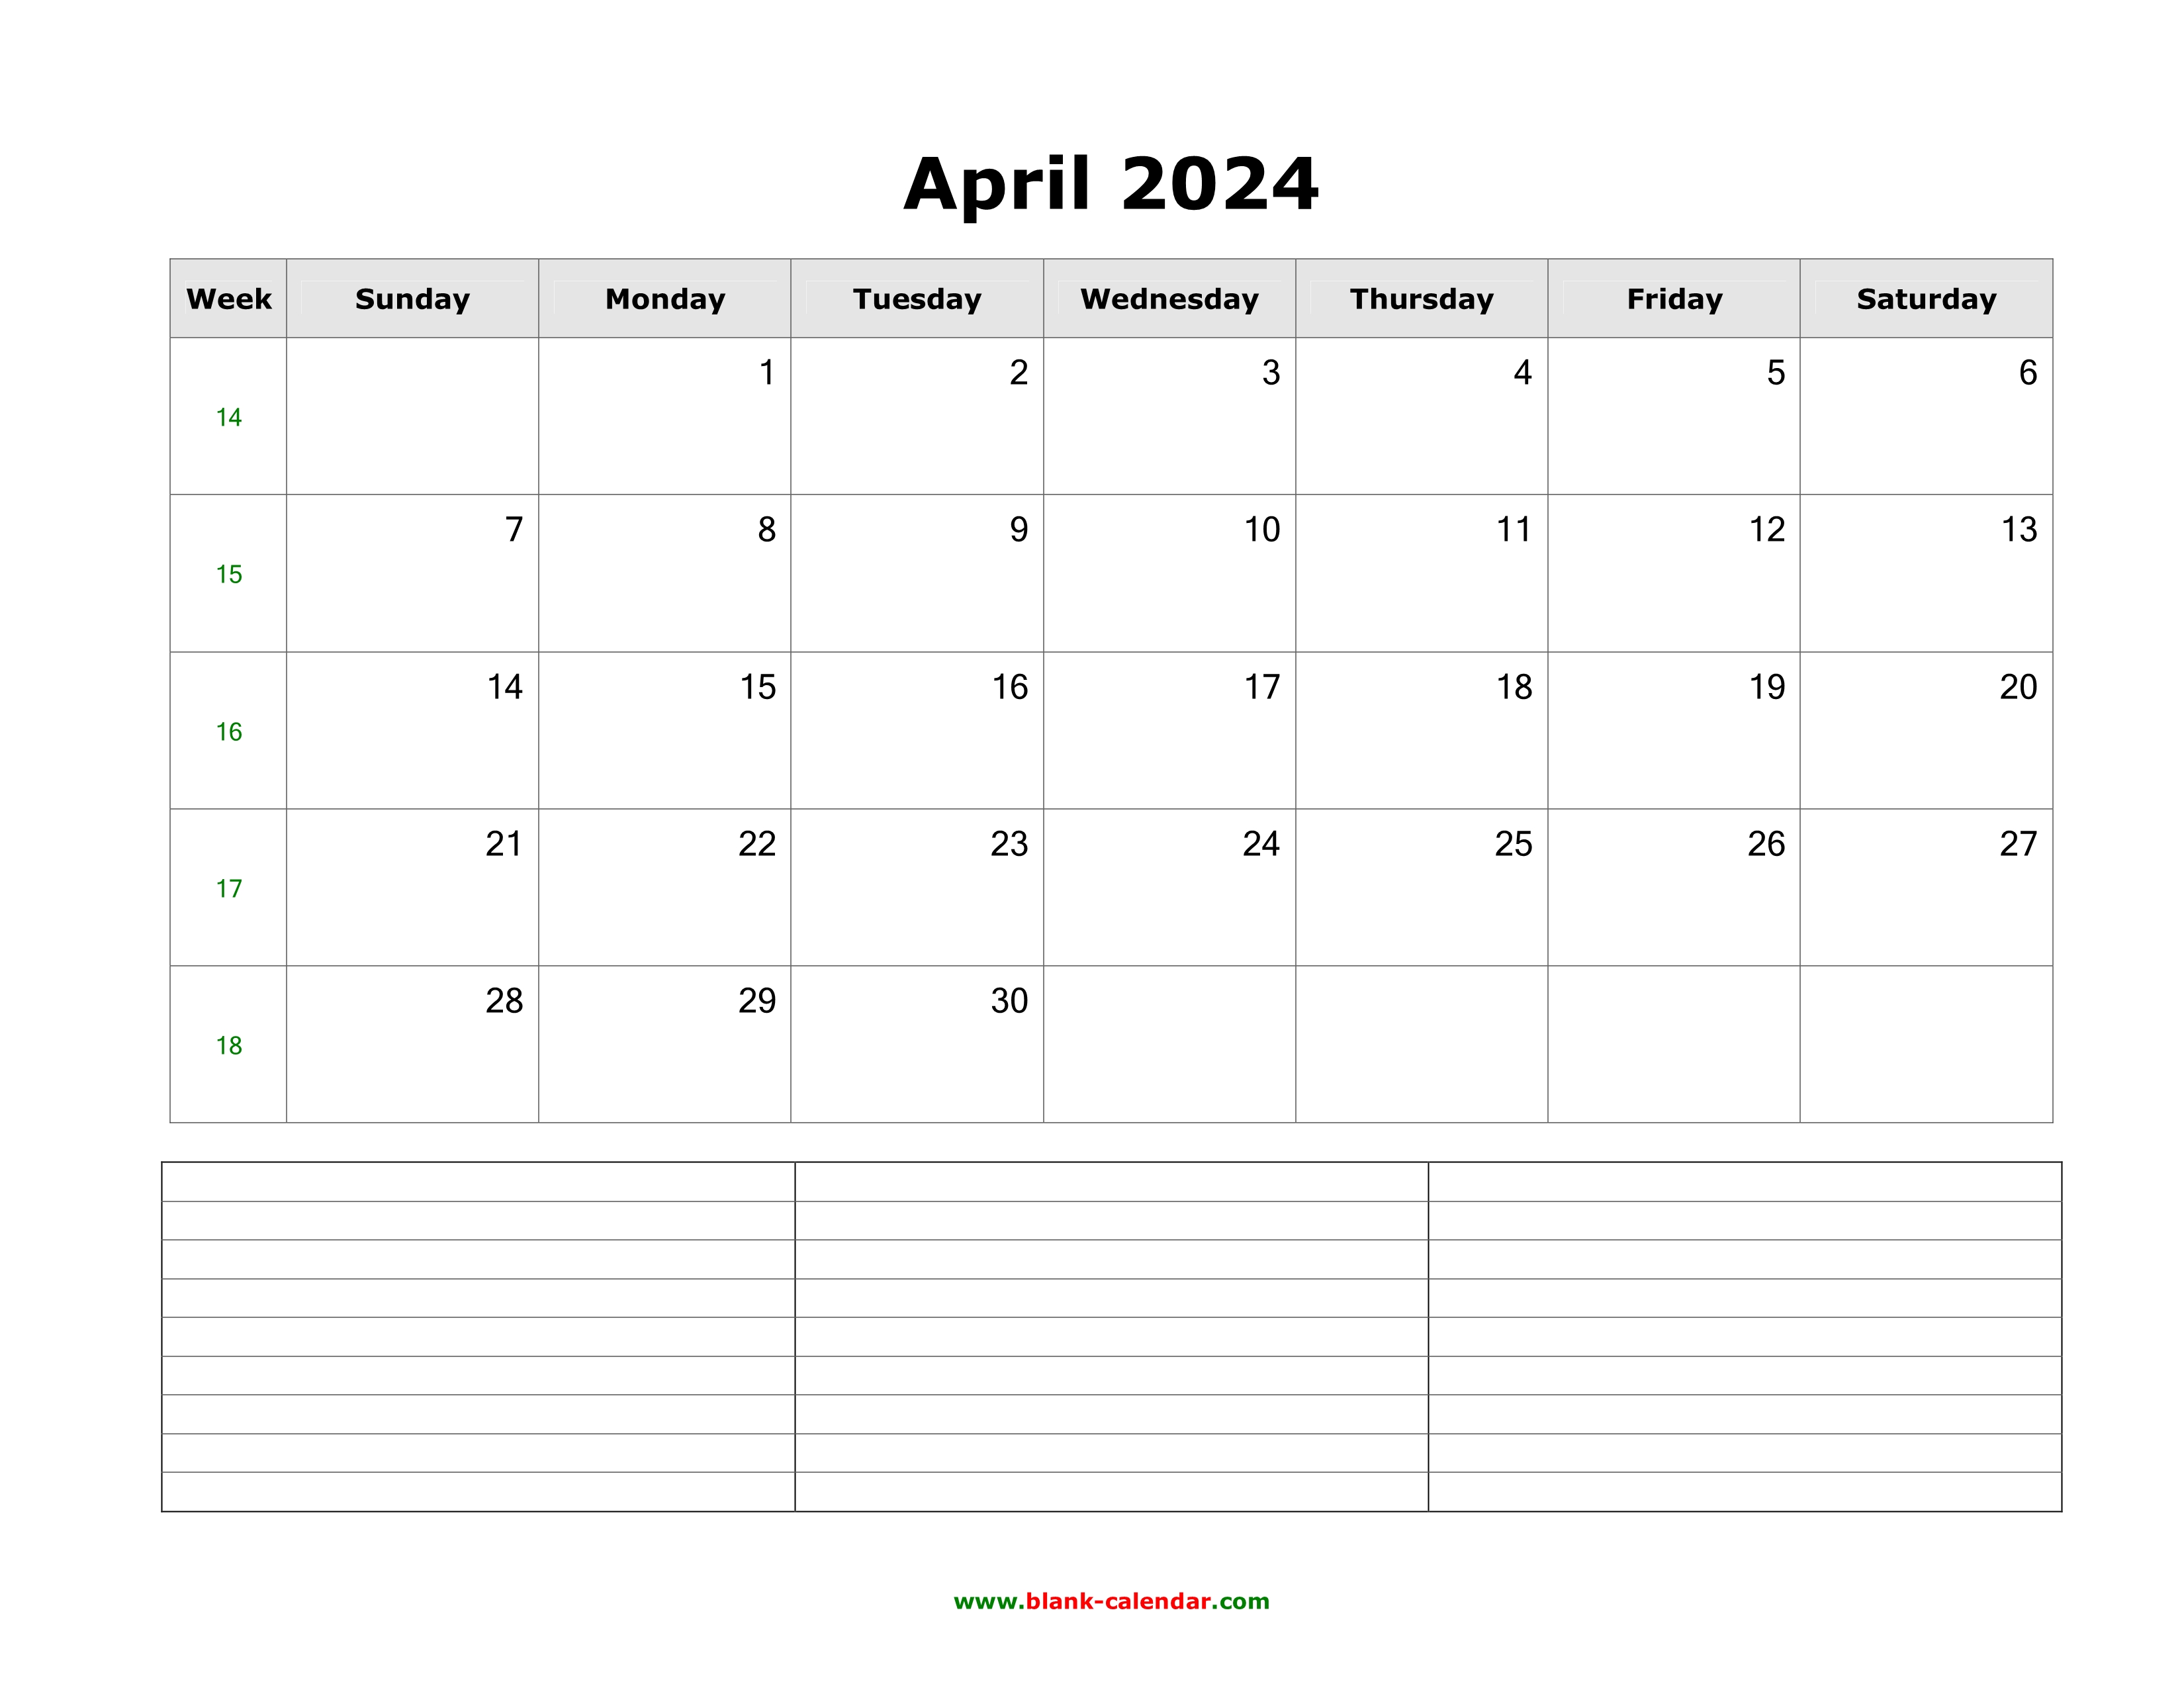 Download April 2024 Blank Calendar with Space for Notes (horizontal)